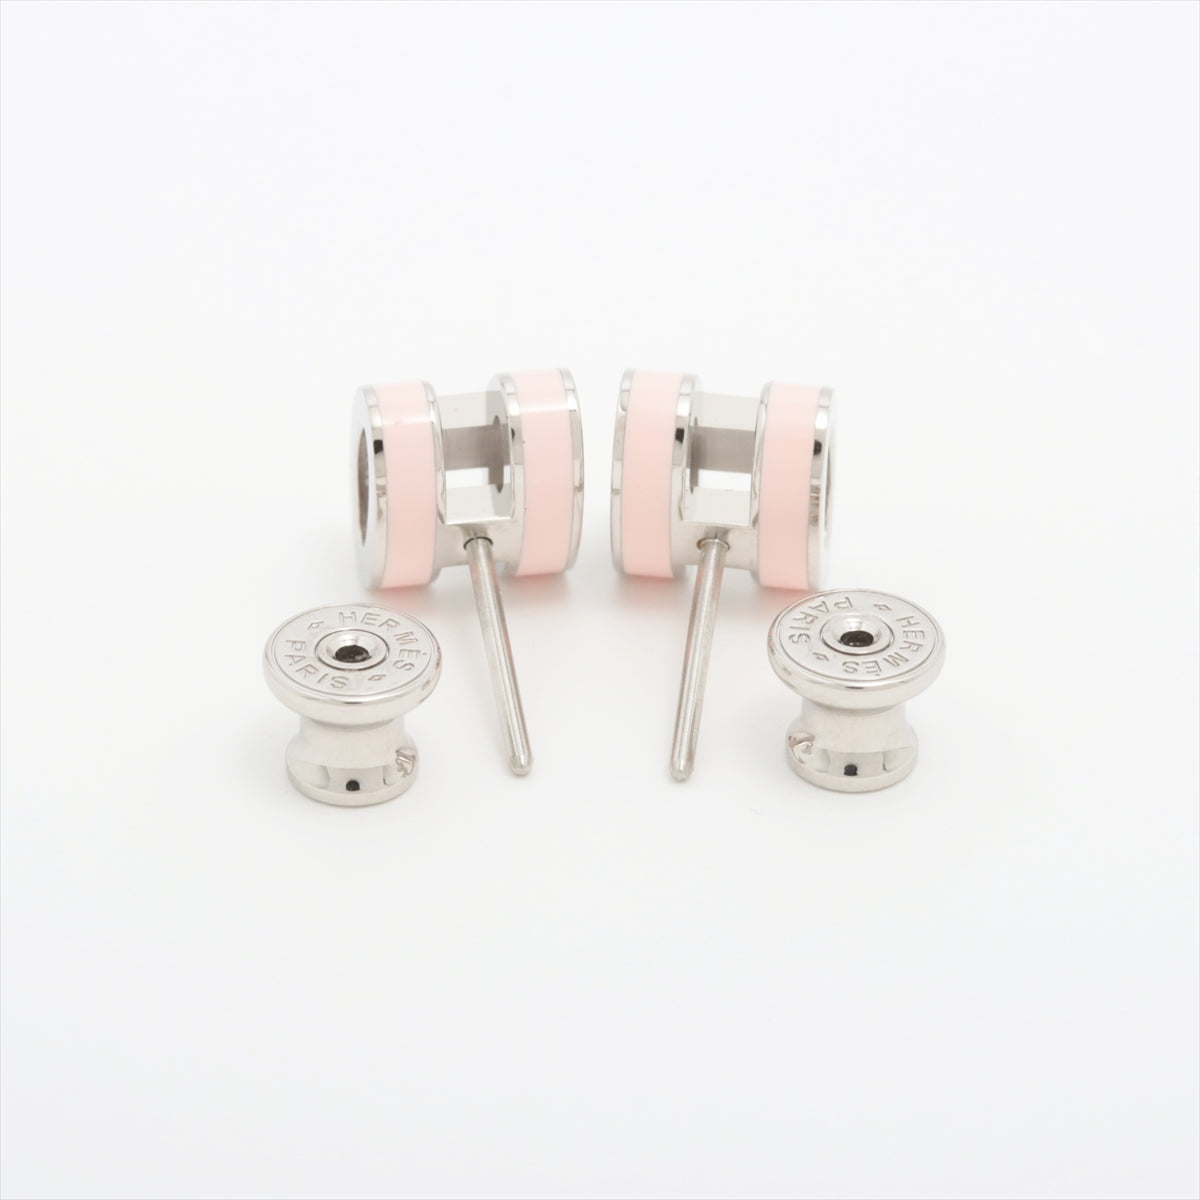 Hermès Courage Ache H cube earrings Piercing jewelry (for both ears) GP Pink